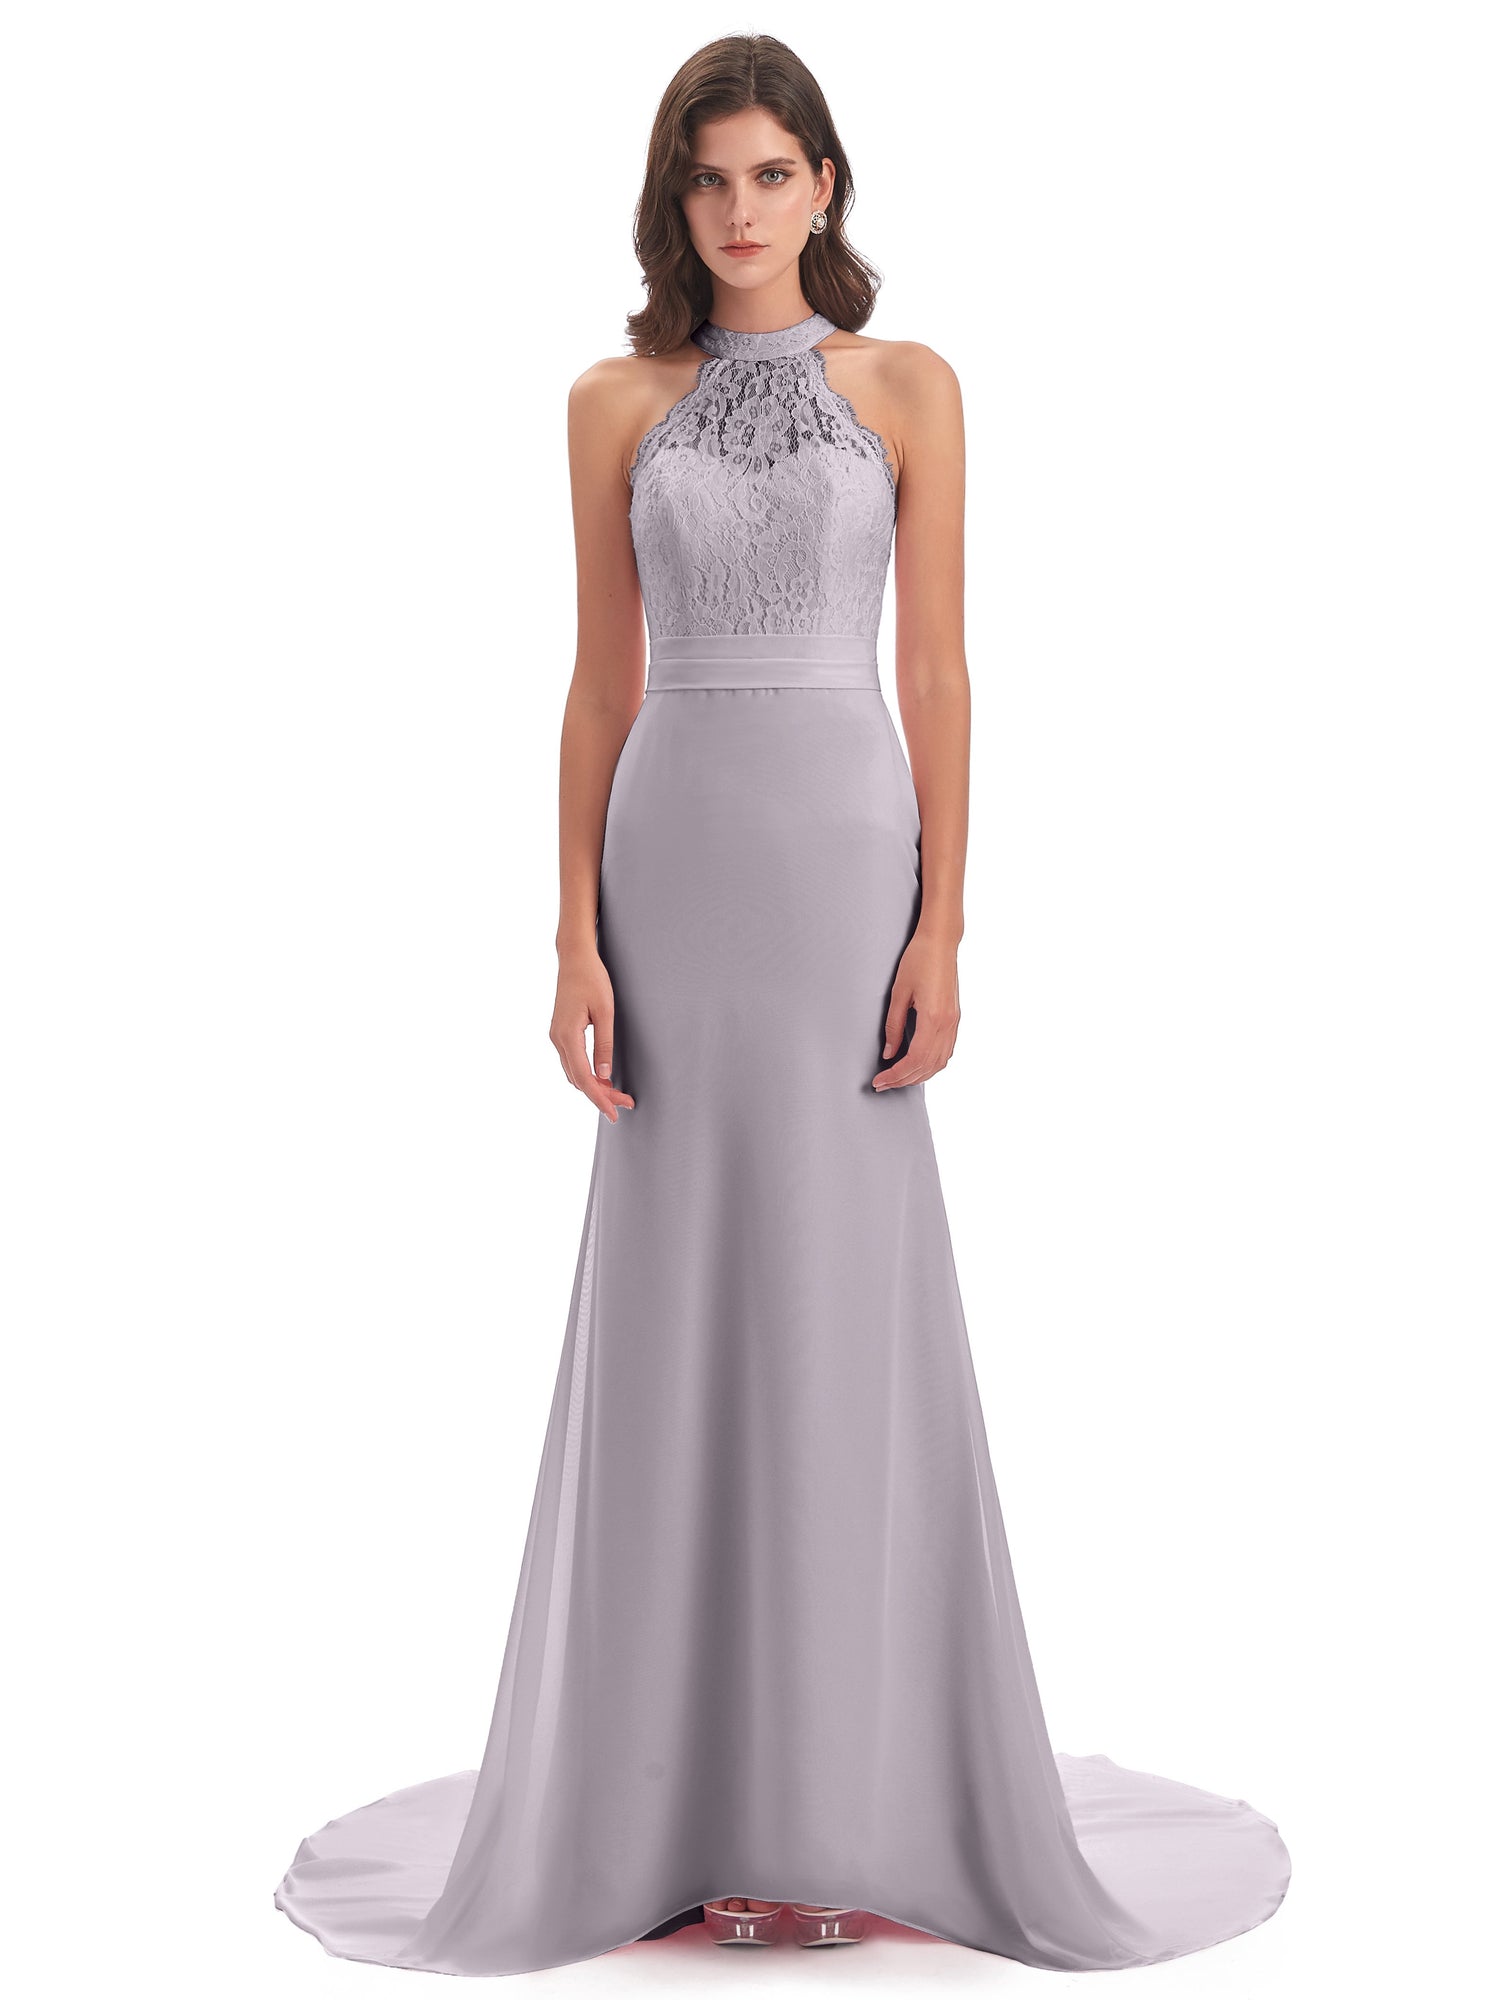 Halter Neck Embroidered Evening Gown, 53% OFF